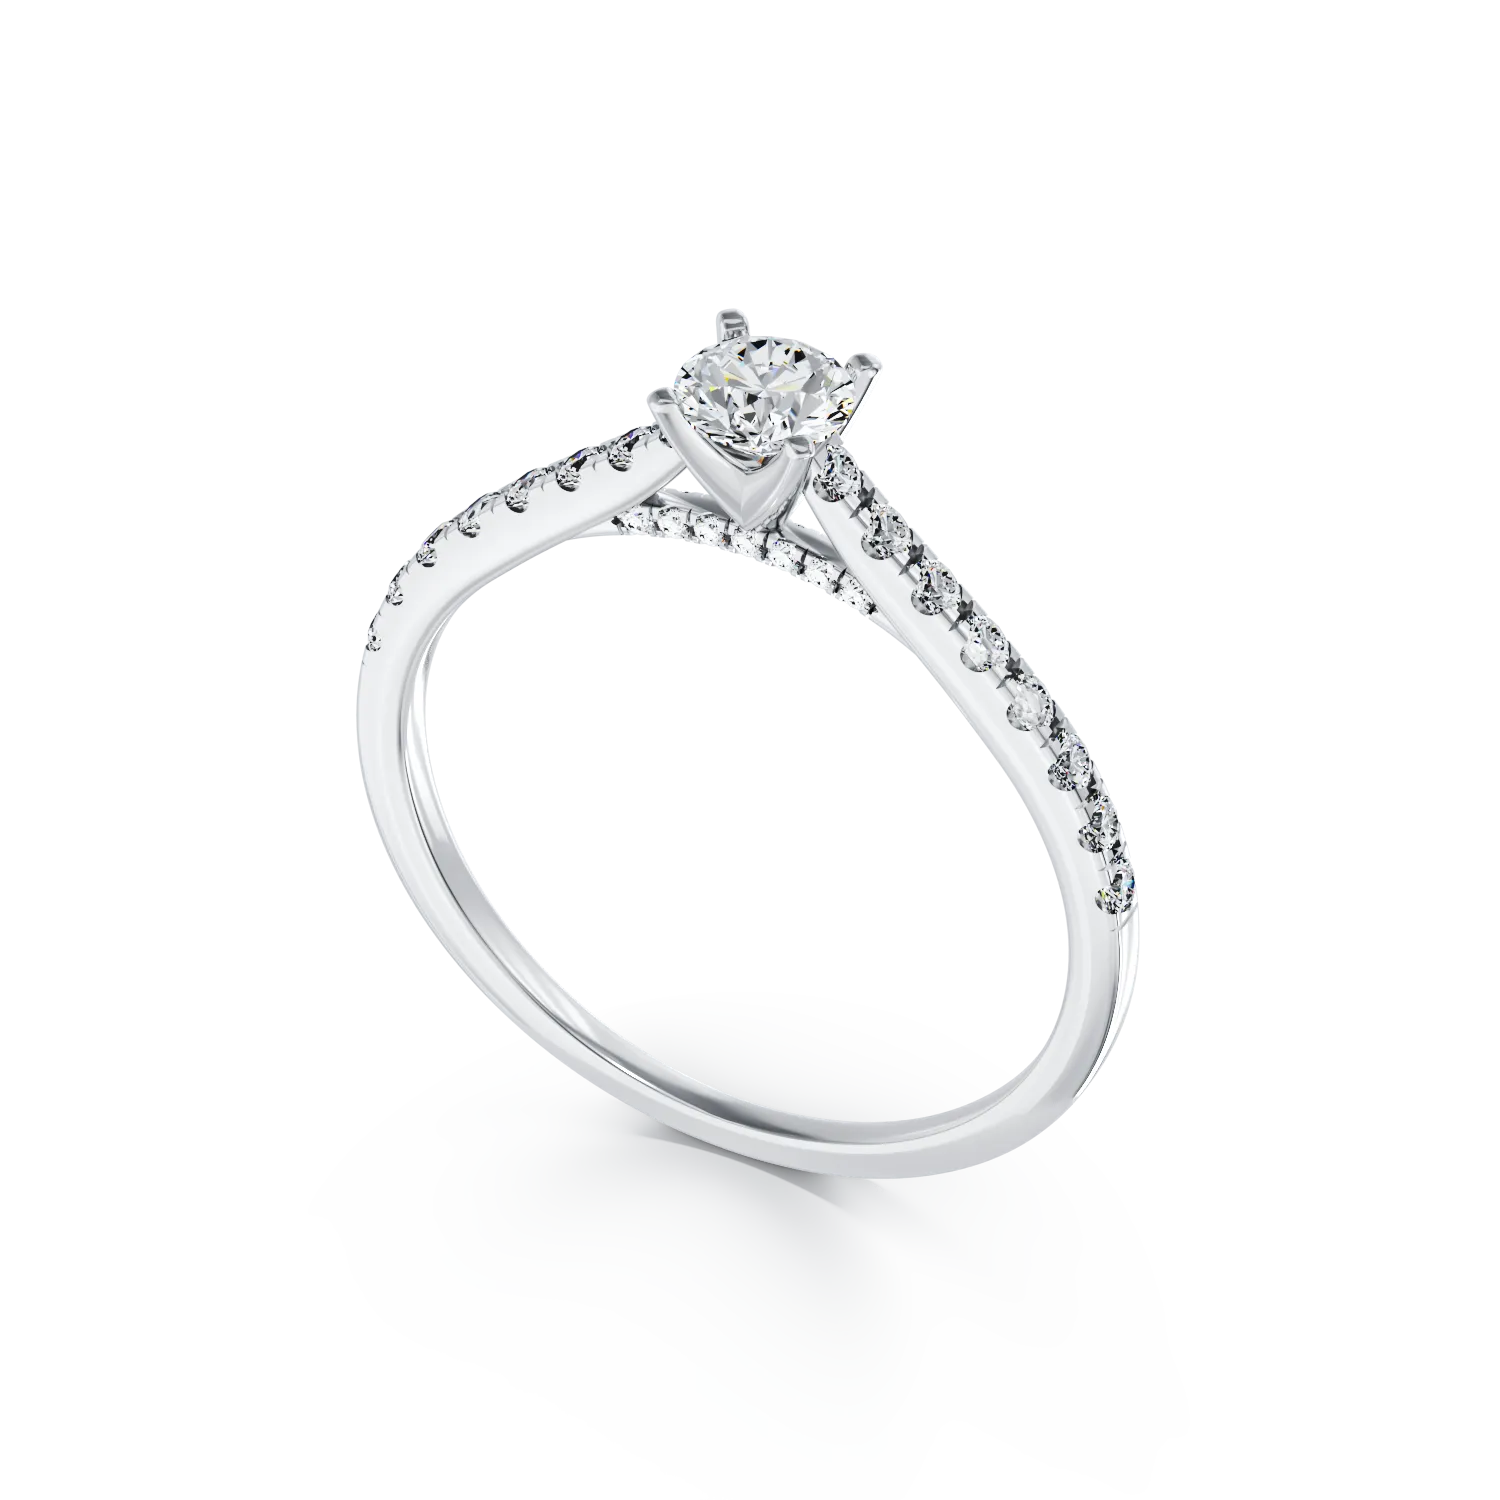 18K white gold engagement ring with 0.26ct diamond and 0.16ct diamonds